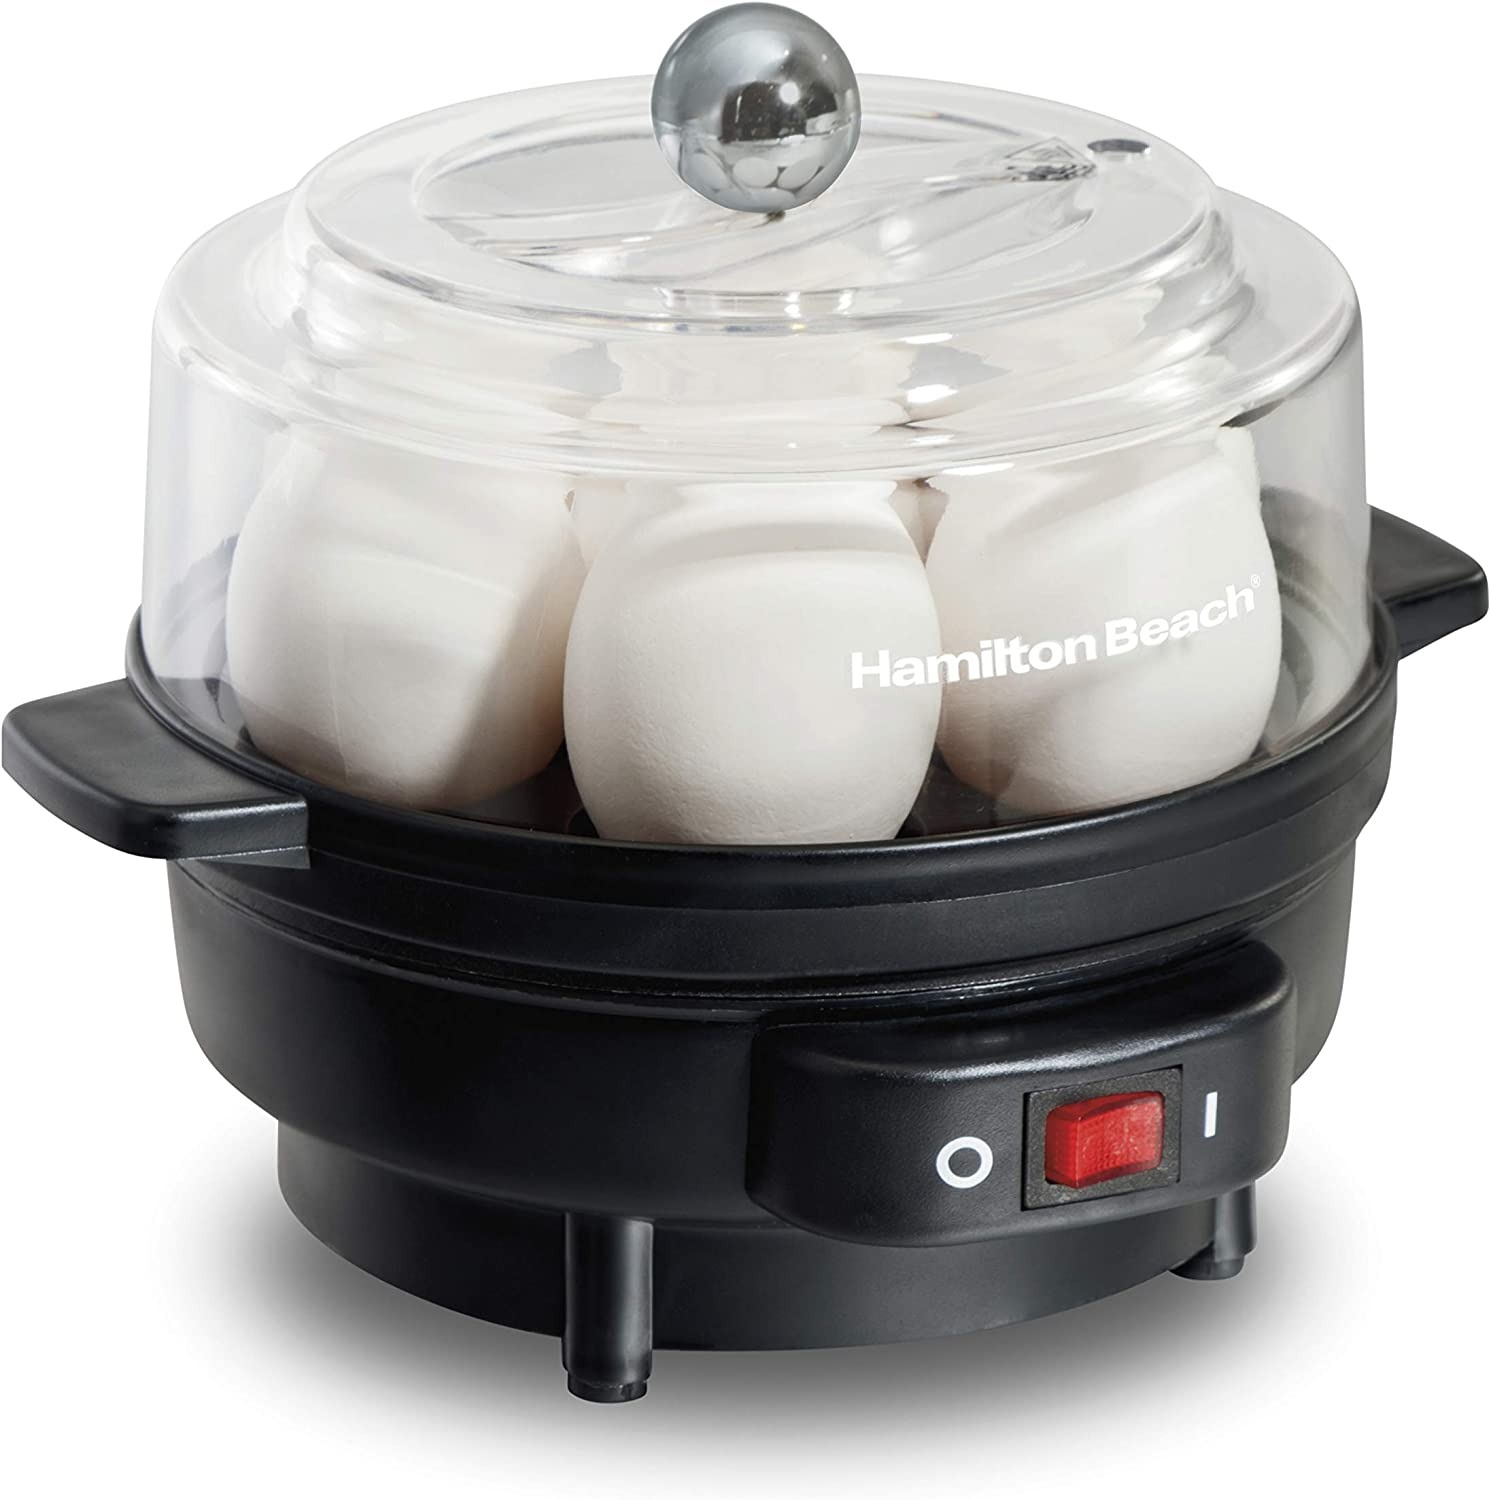 Egg Cookers 4